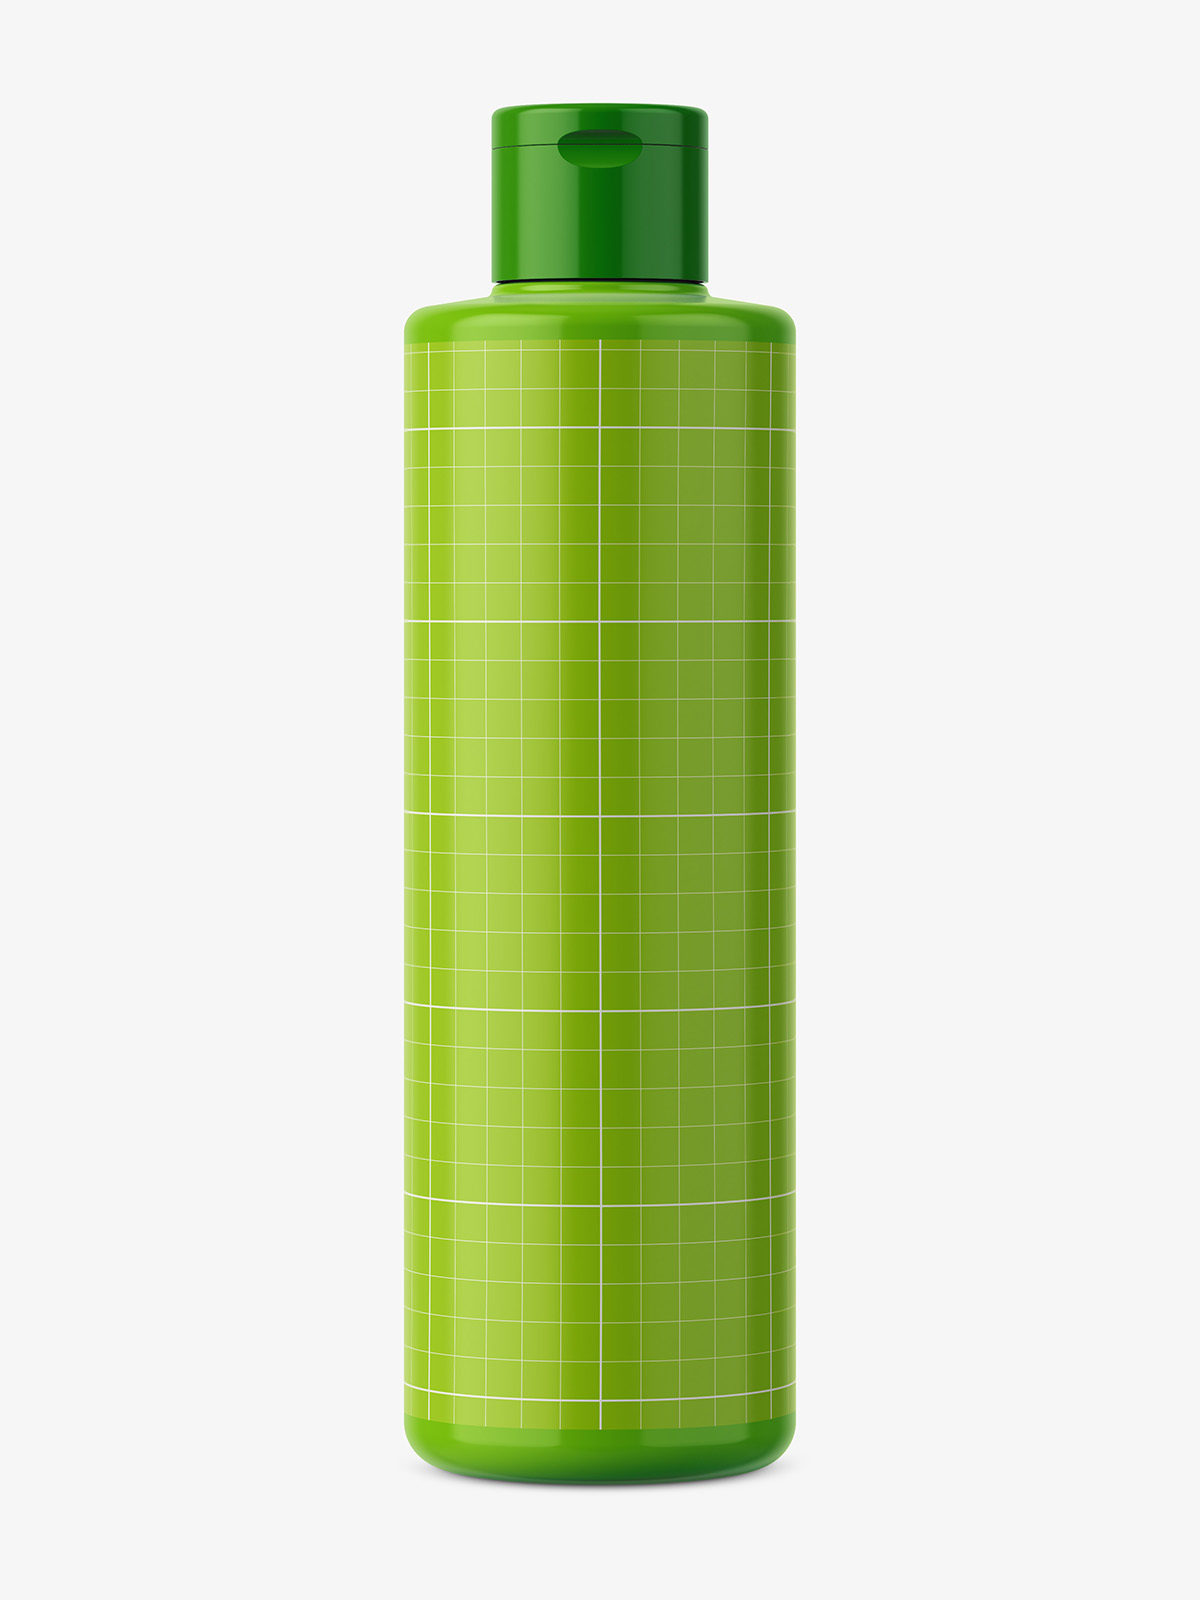 Download Simple round plastic bottle mockup / glossy - Smarty Mockups